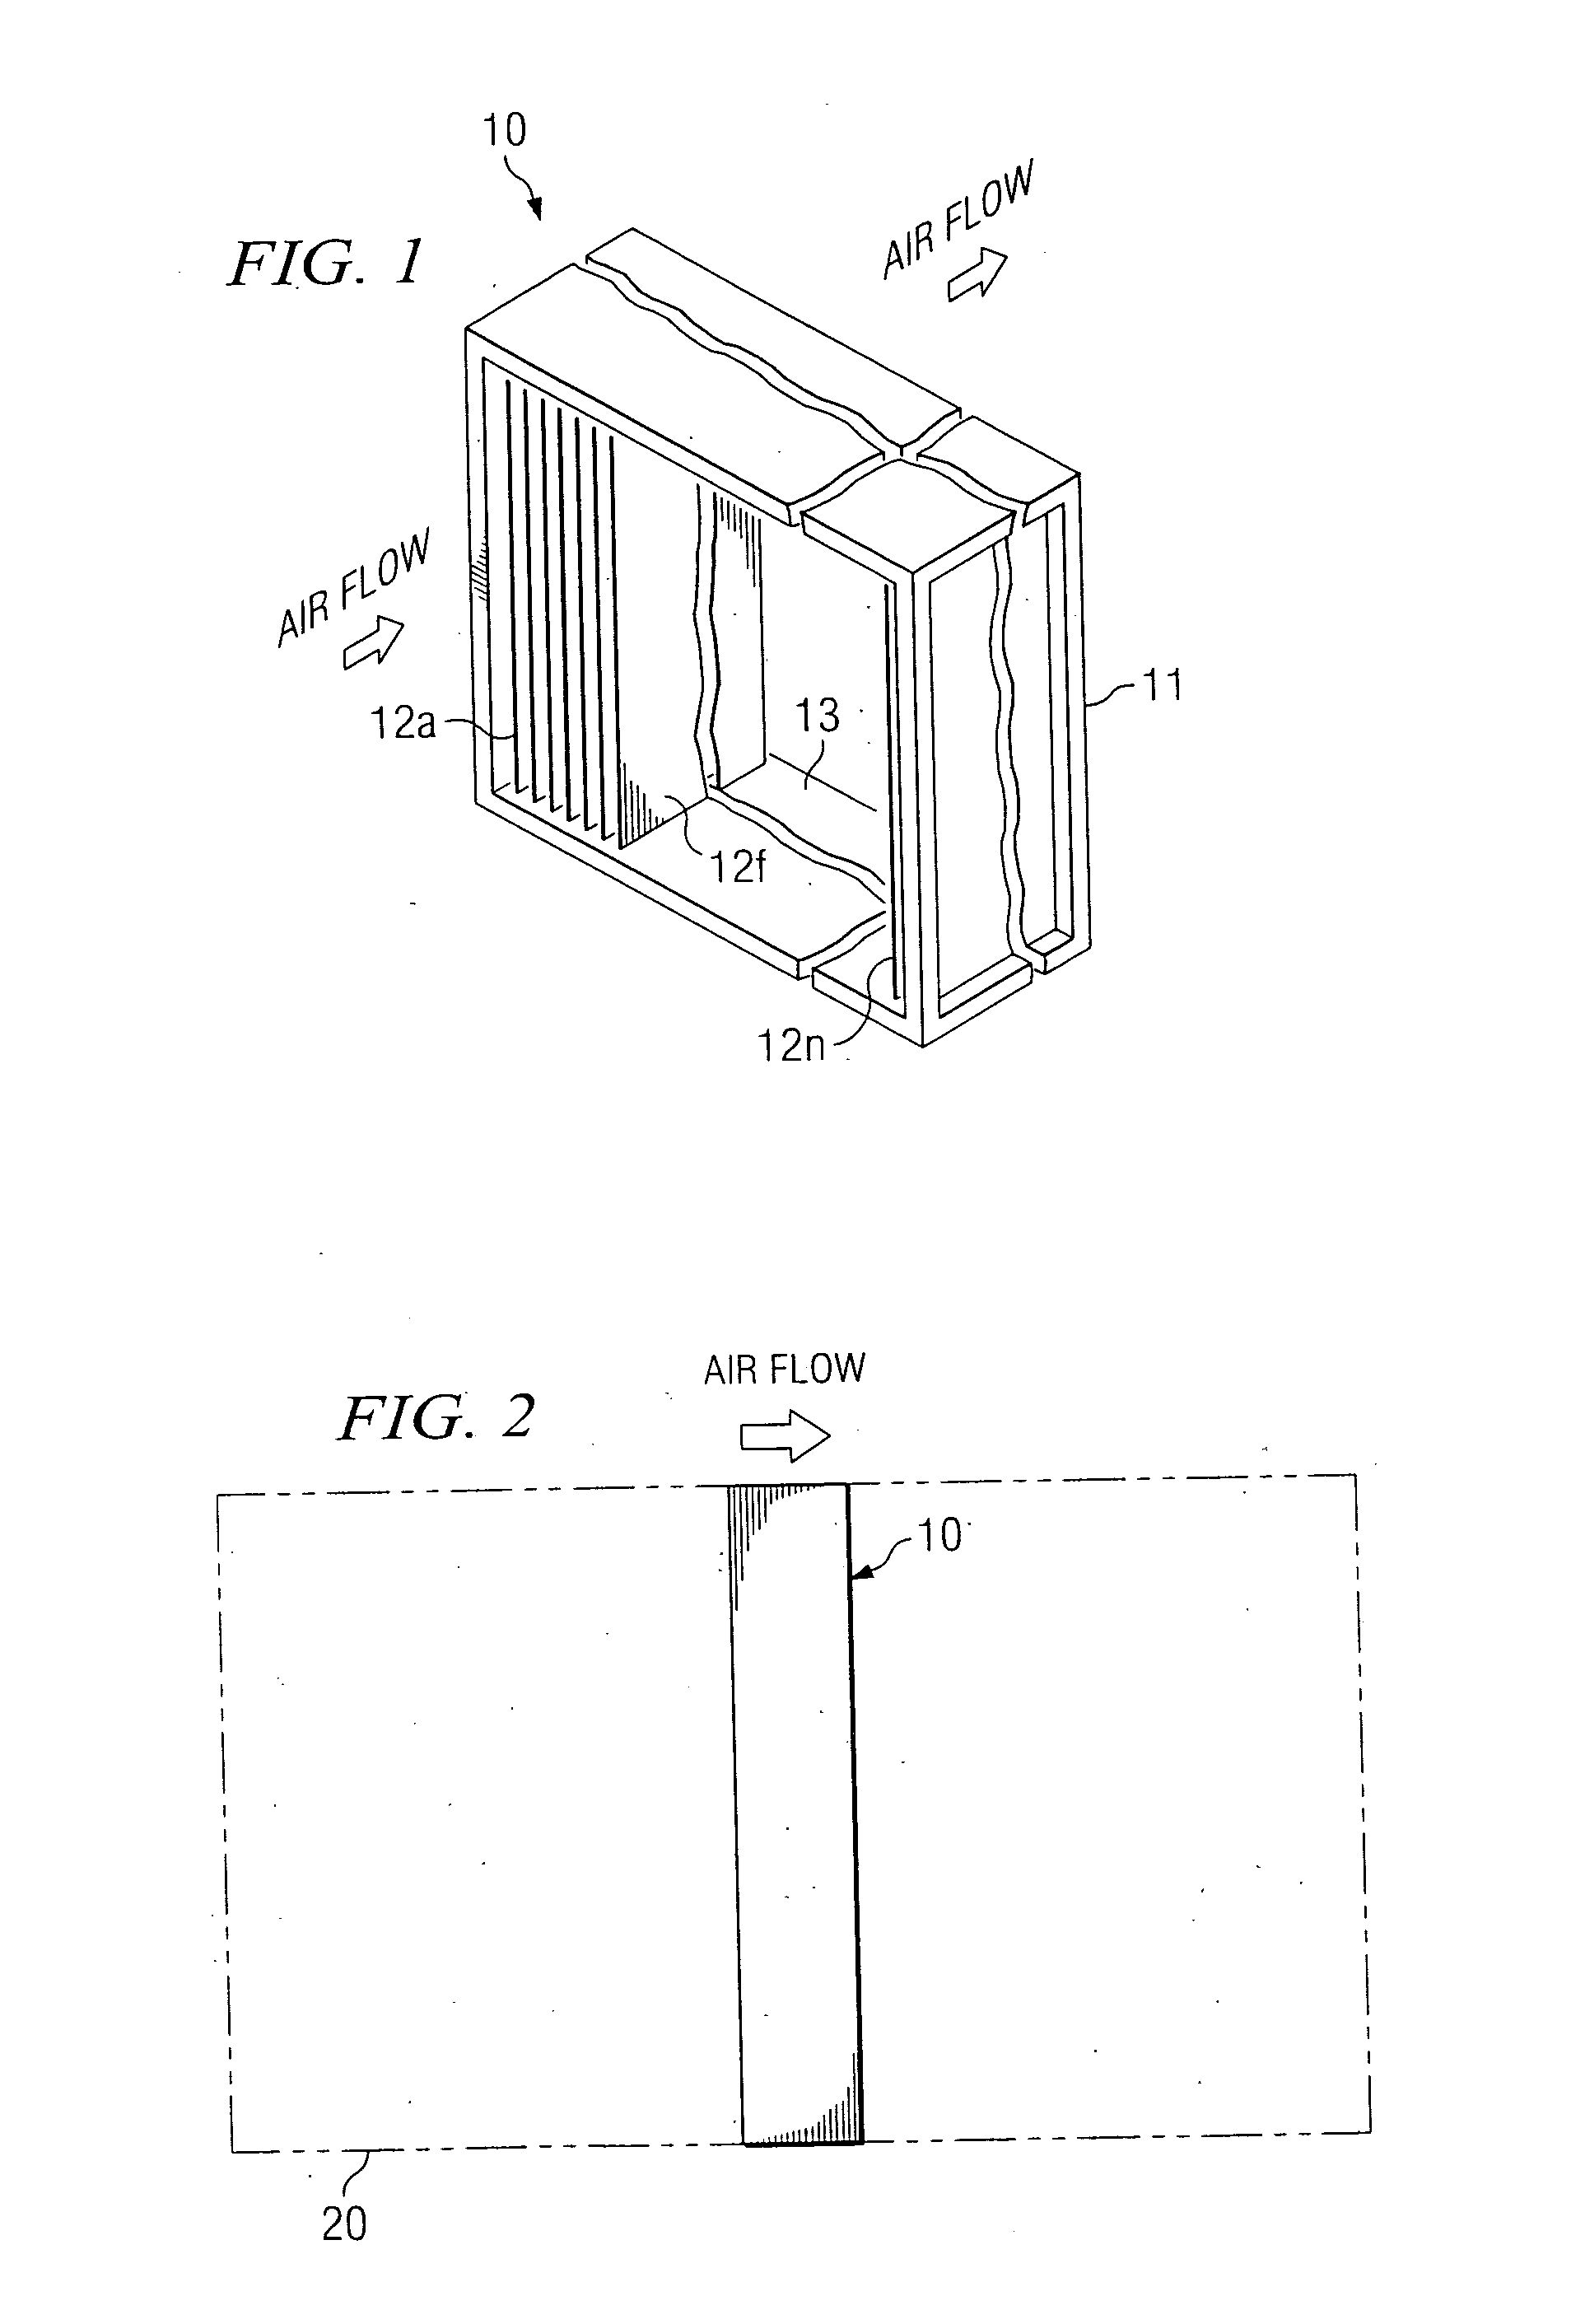 Air flow direction neutral heat transfer device